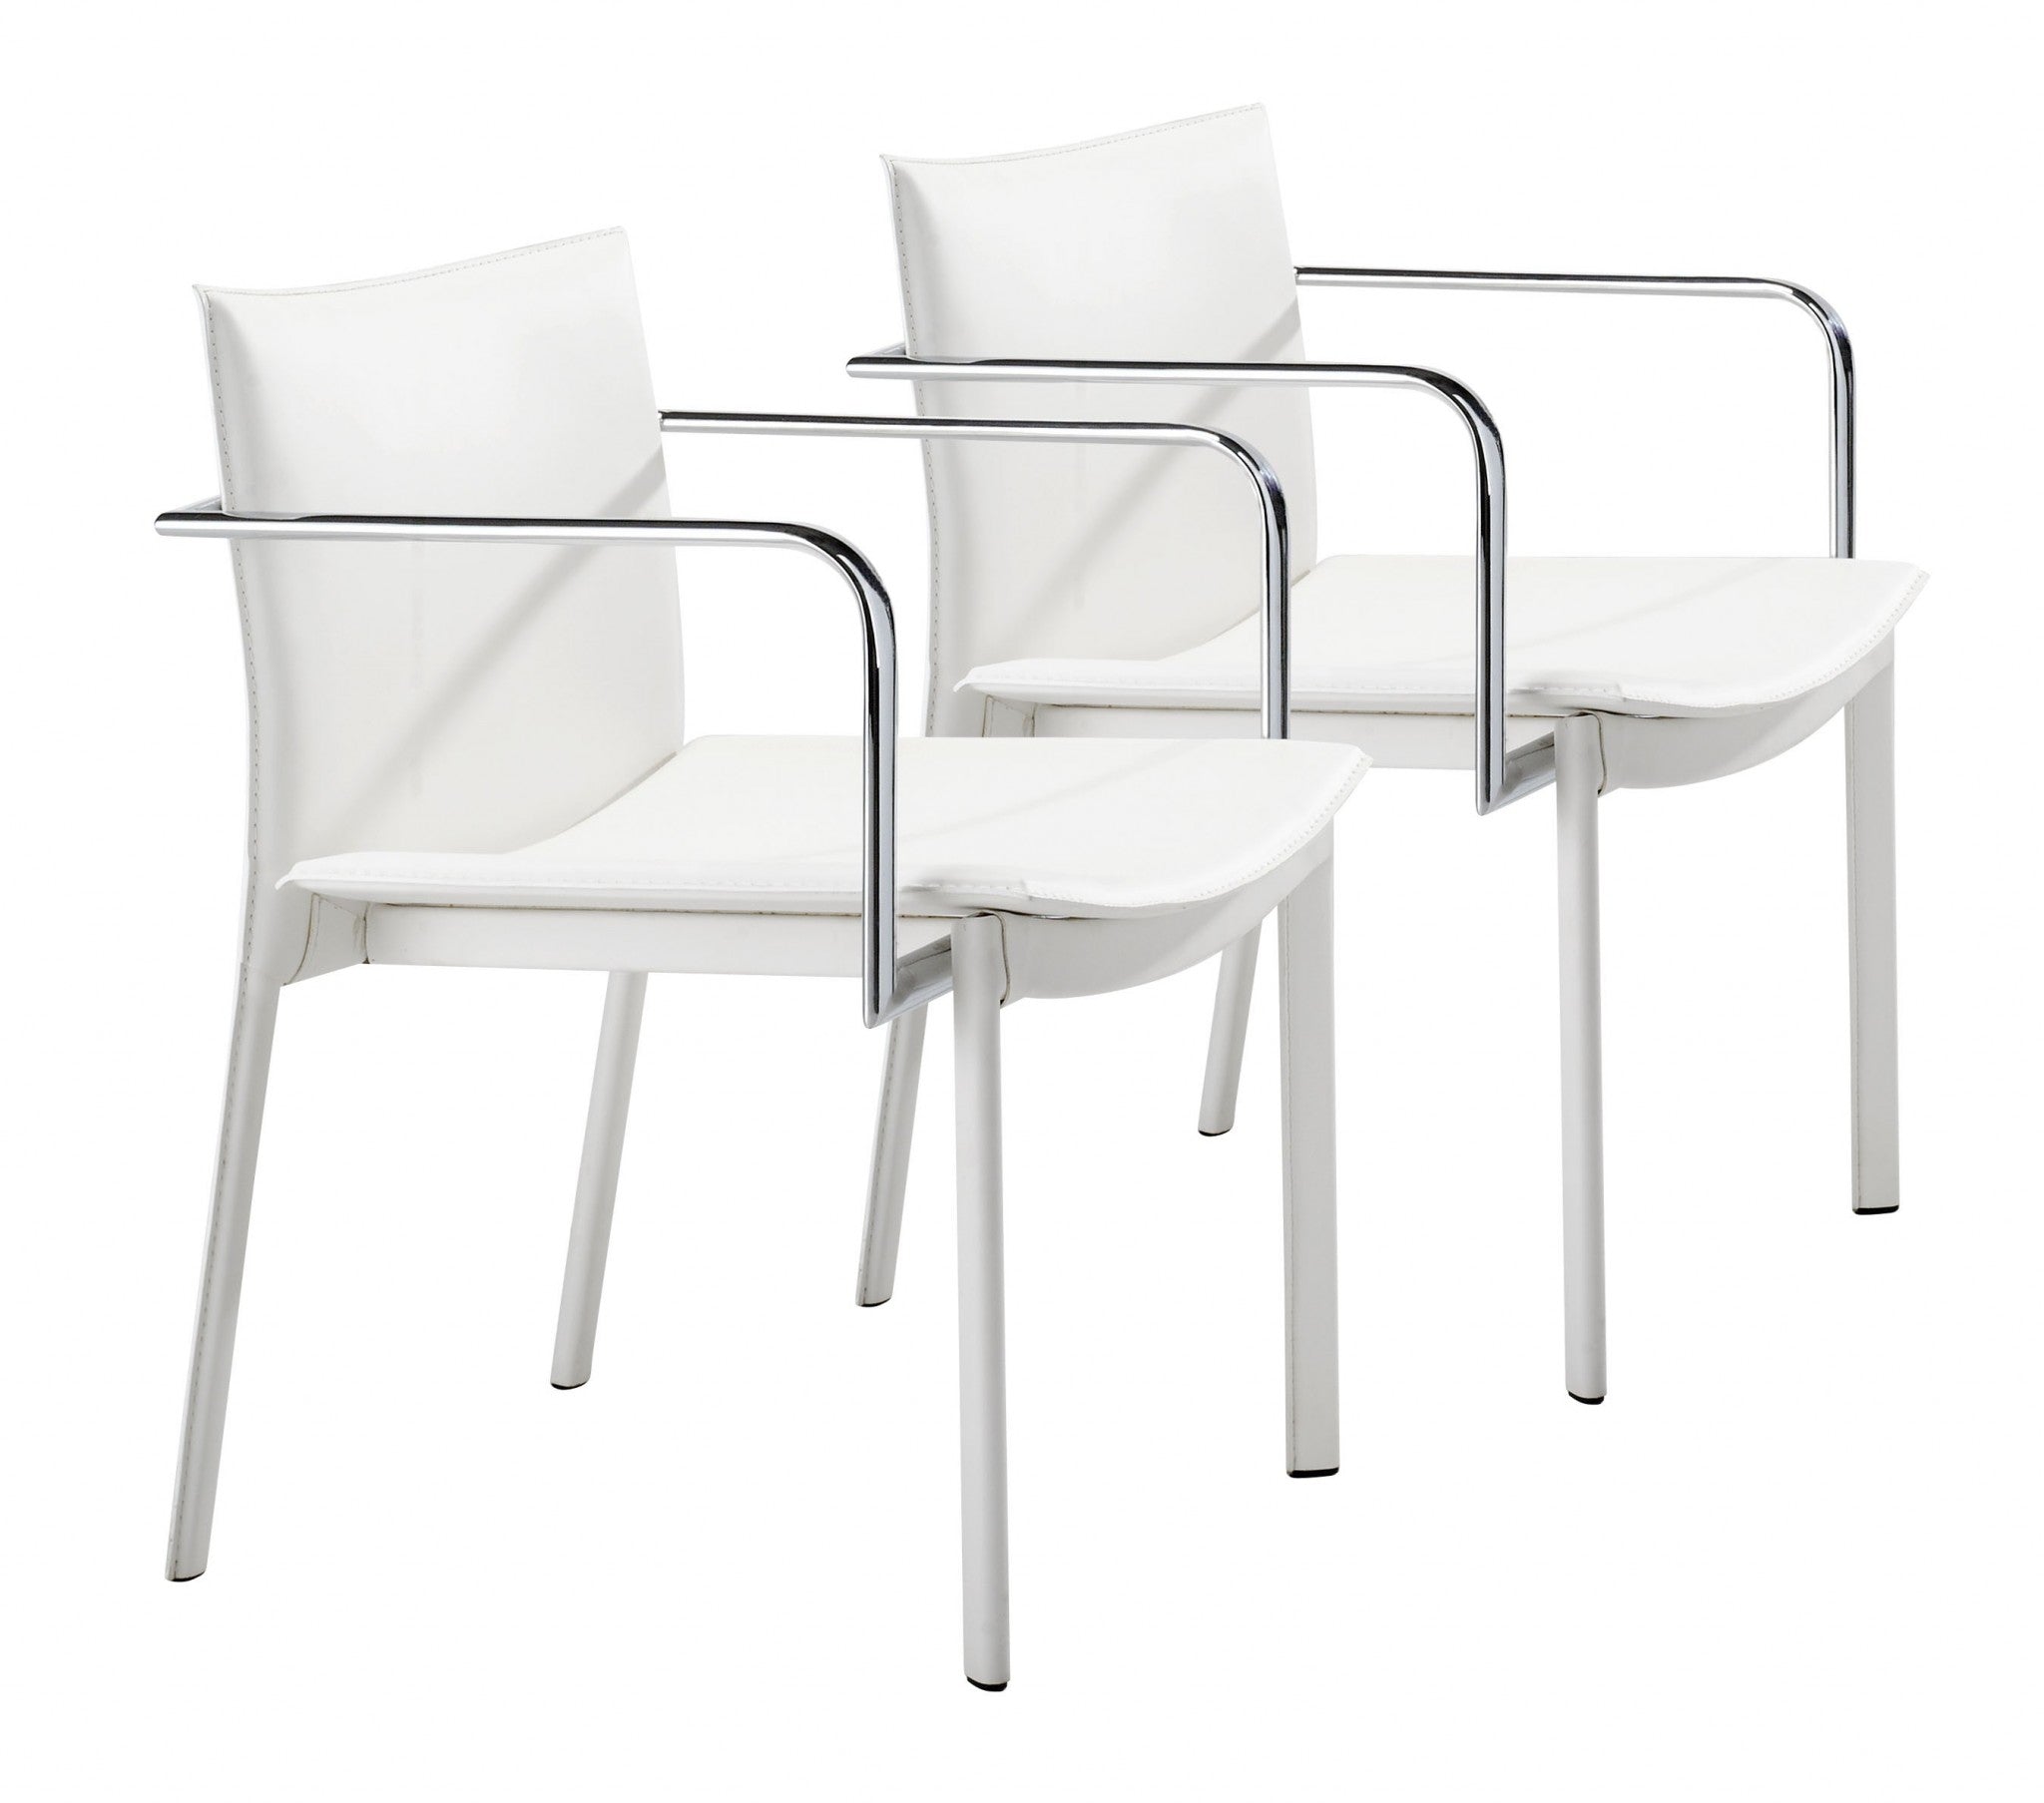 White-Faux-Leather-Seat-Adjustable-Conference-Chair-Metal-Back-Steel-Frame-Office-Chairs